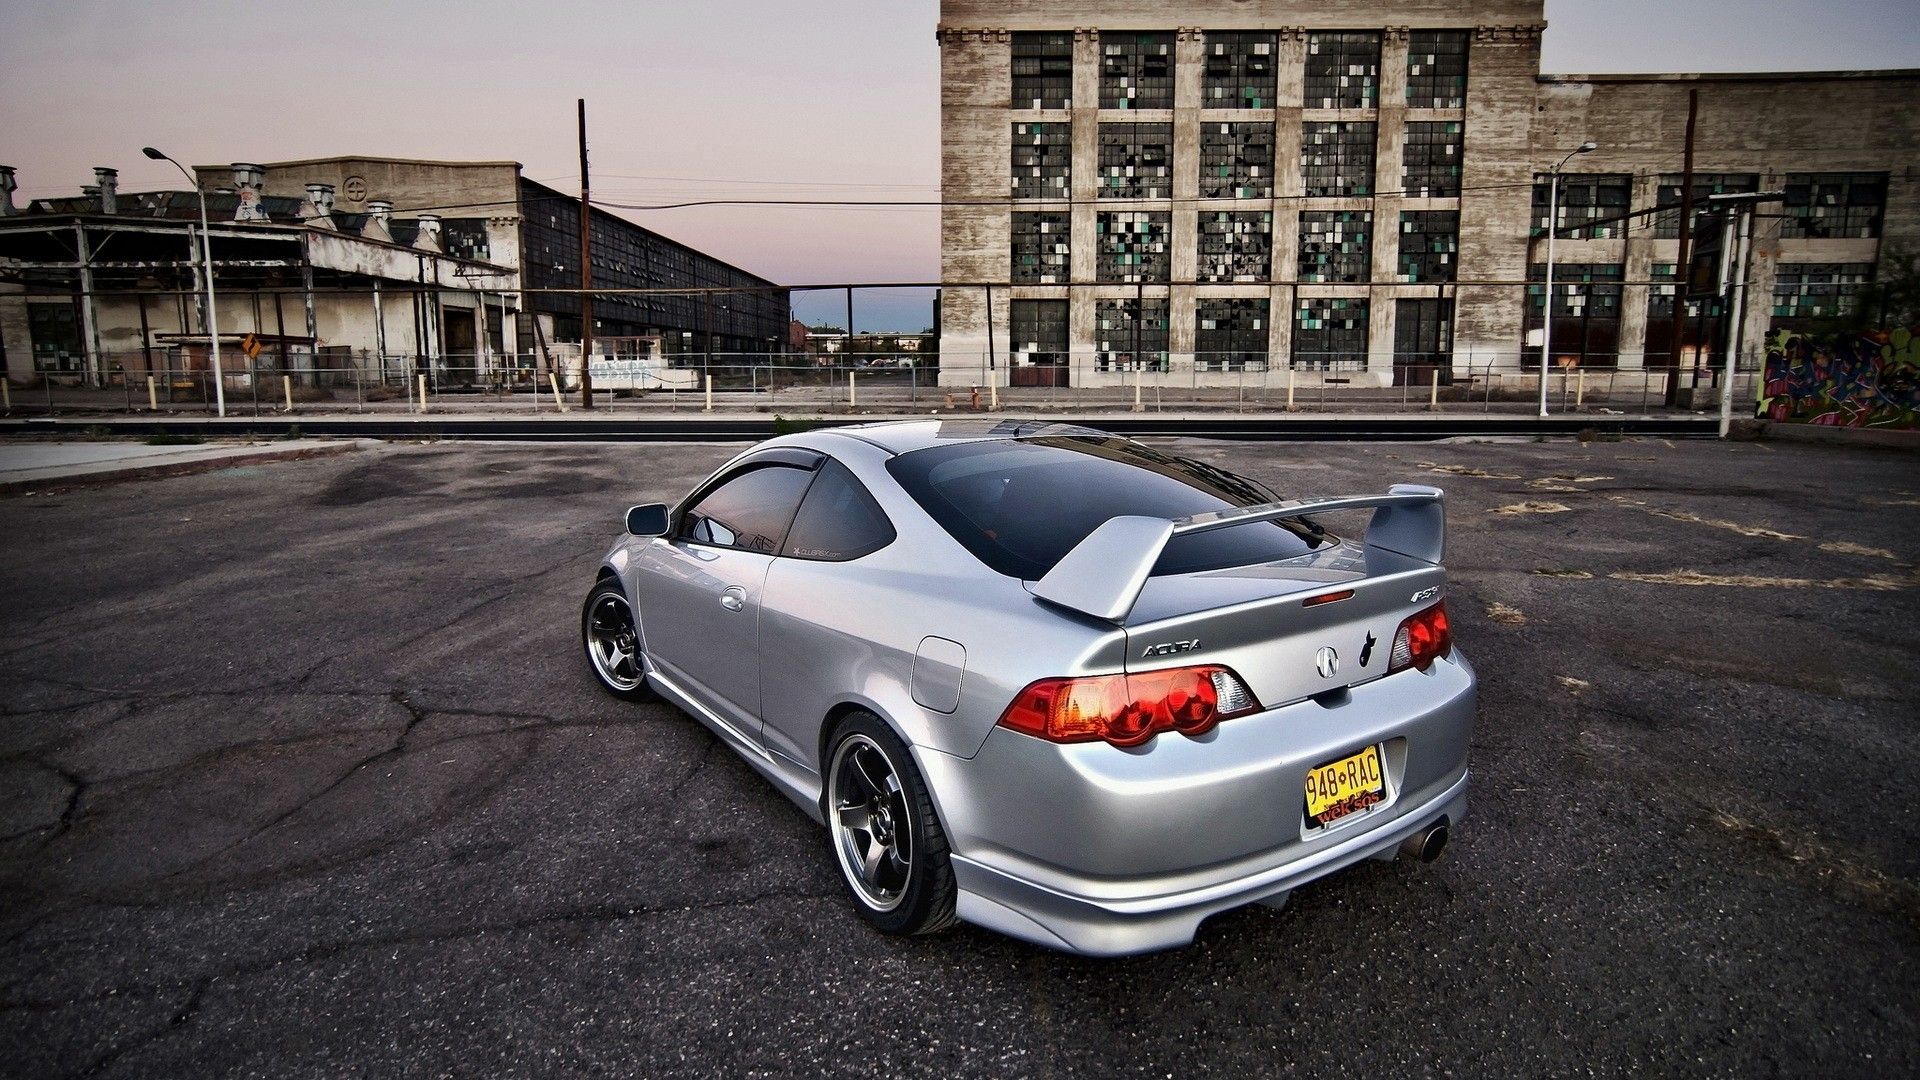 Acura rsx wallpaper iphone